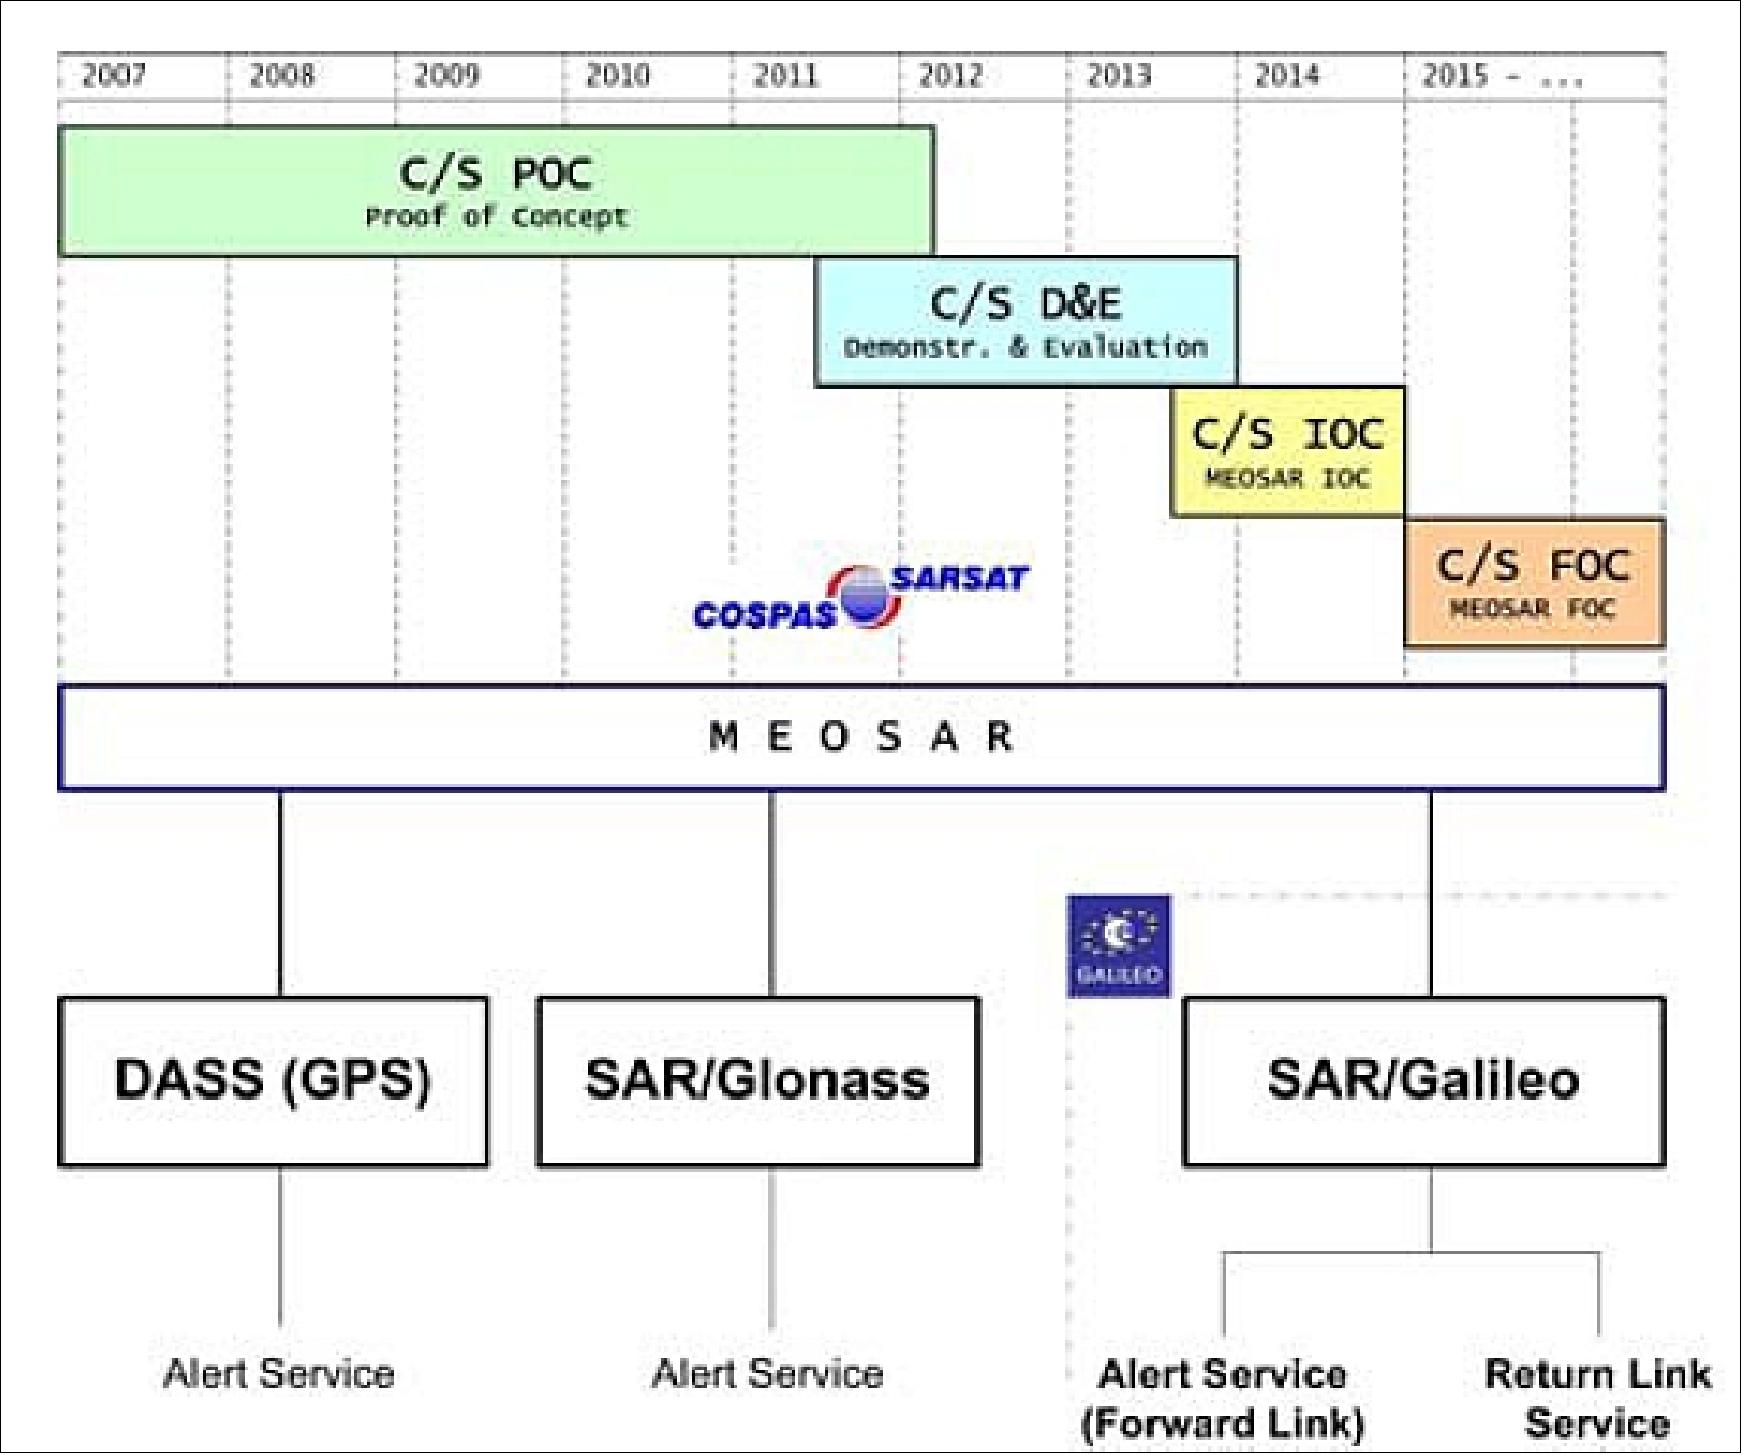 Figure 29: SAR/Galileo as part of the MEOSAR system (image credit: ESA)